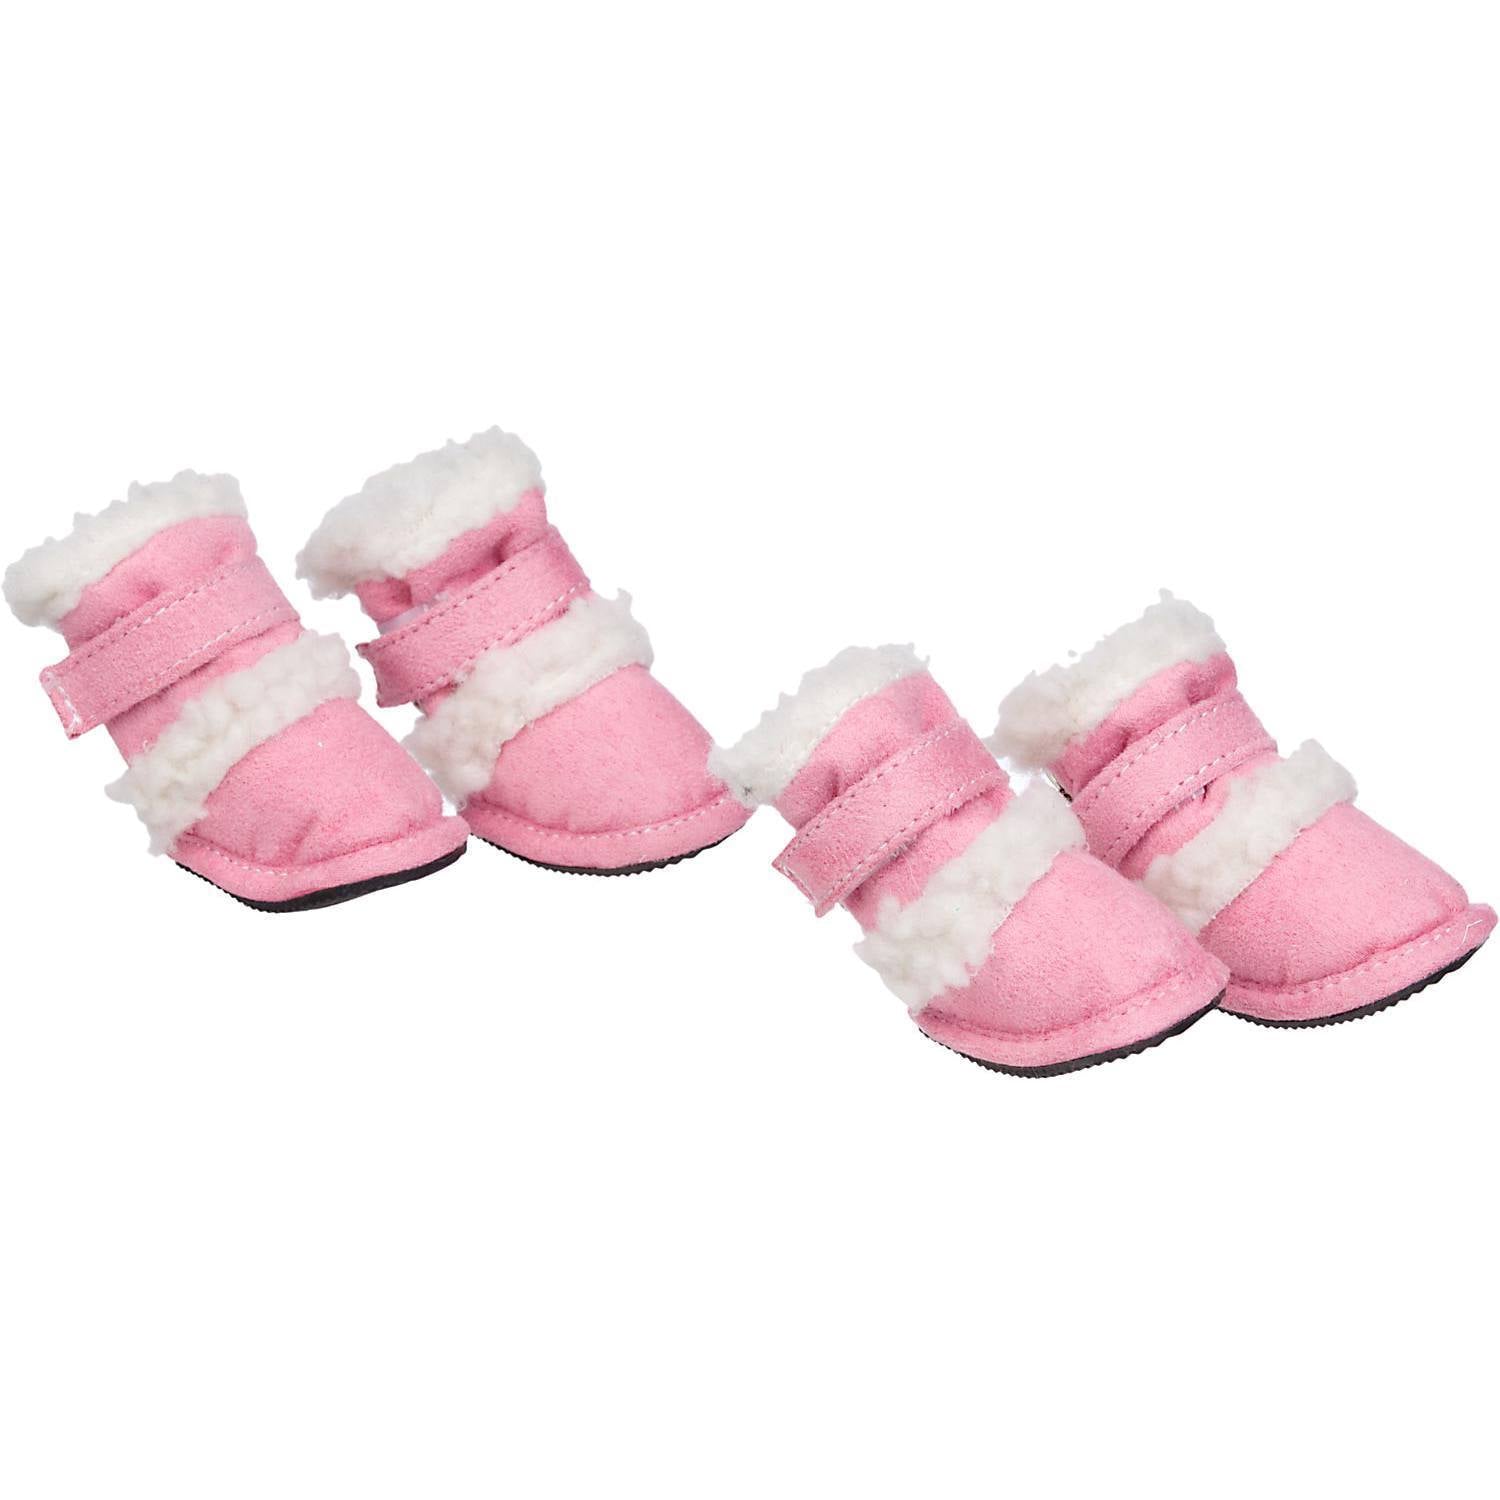 Pet Life ® 'Duggz' 3M Insulated Winter Fashion Dog Shoes Booties - Set of 4 X-Small Pink & White